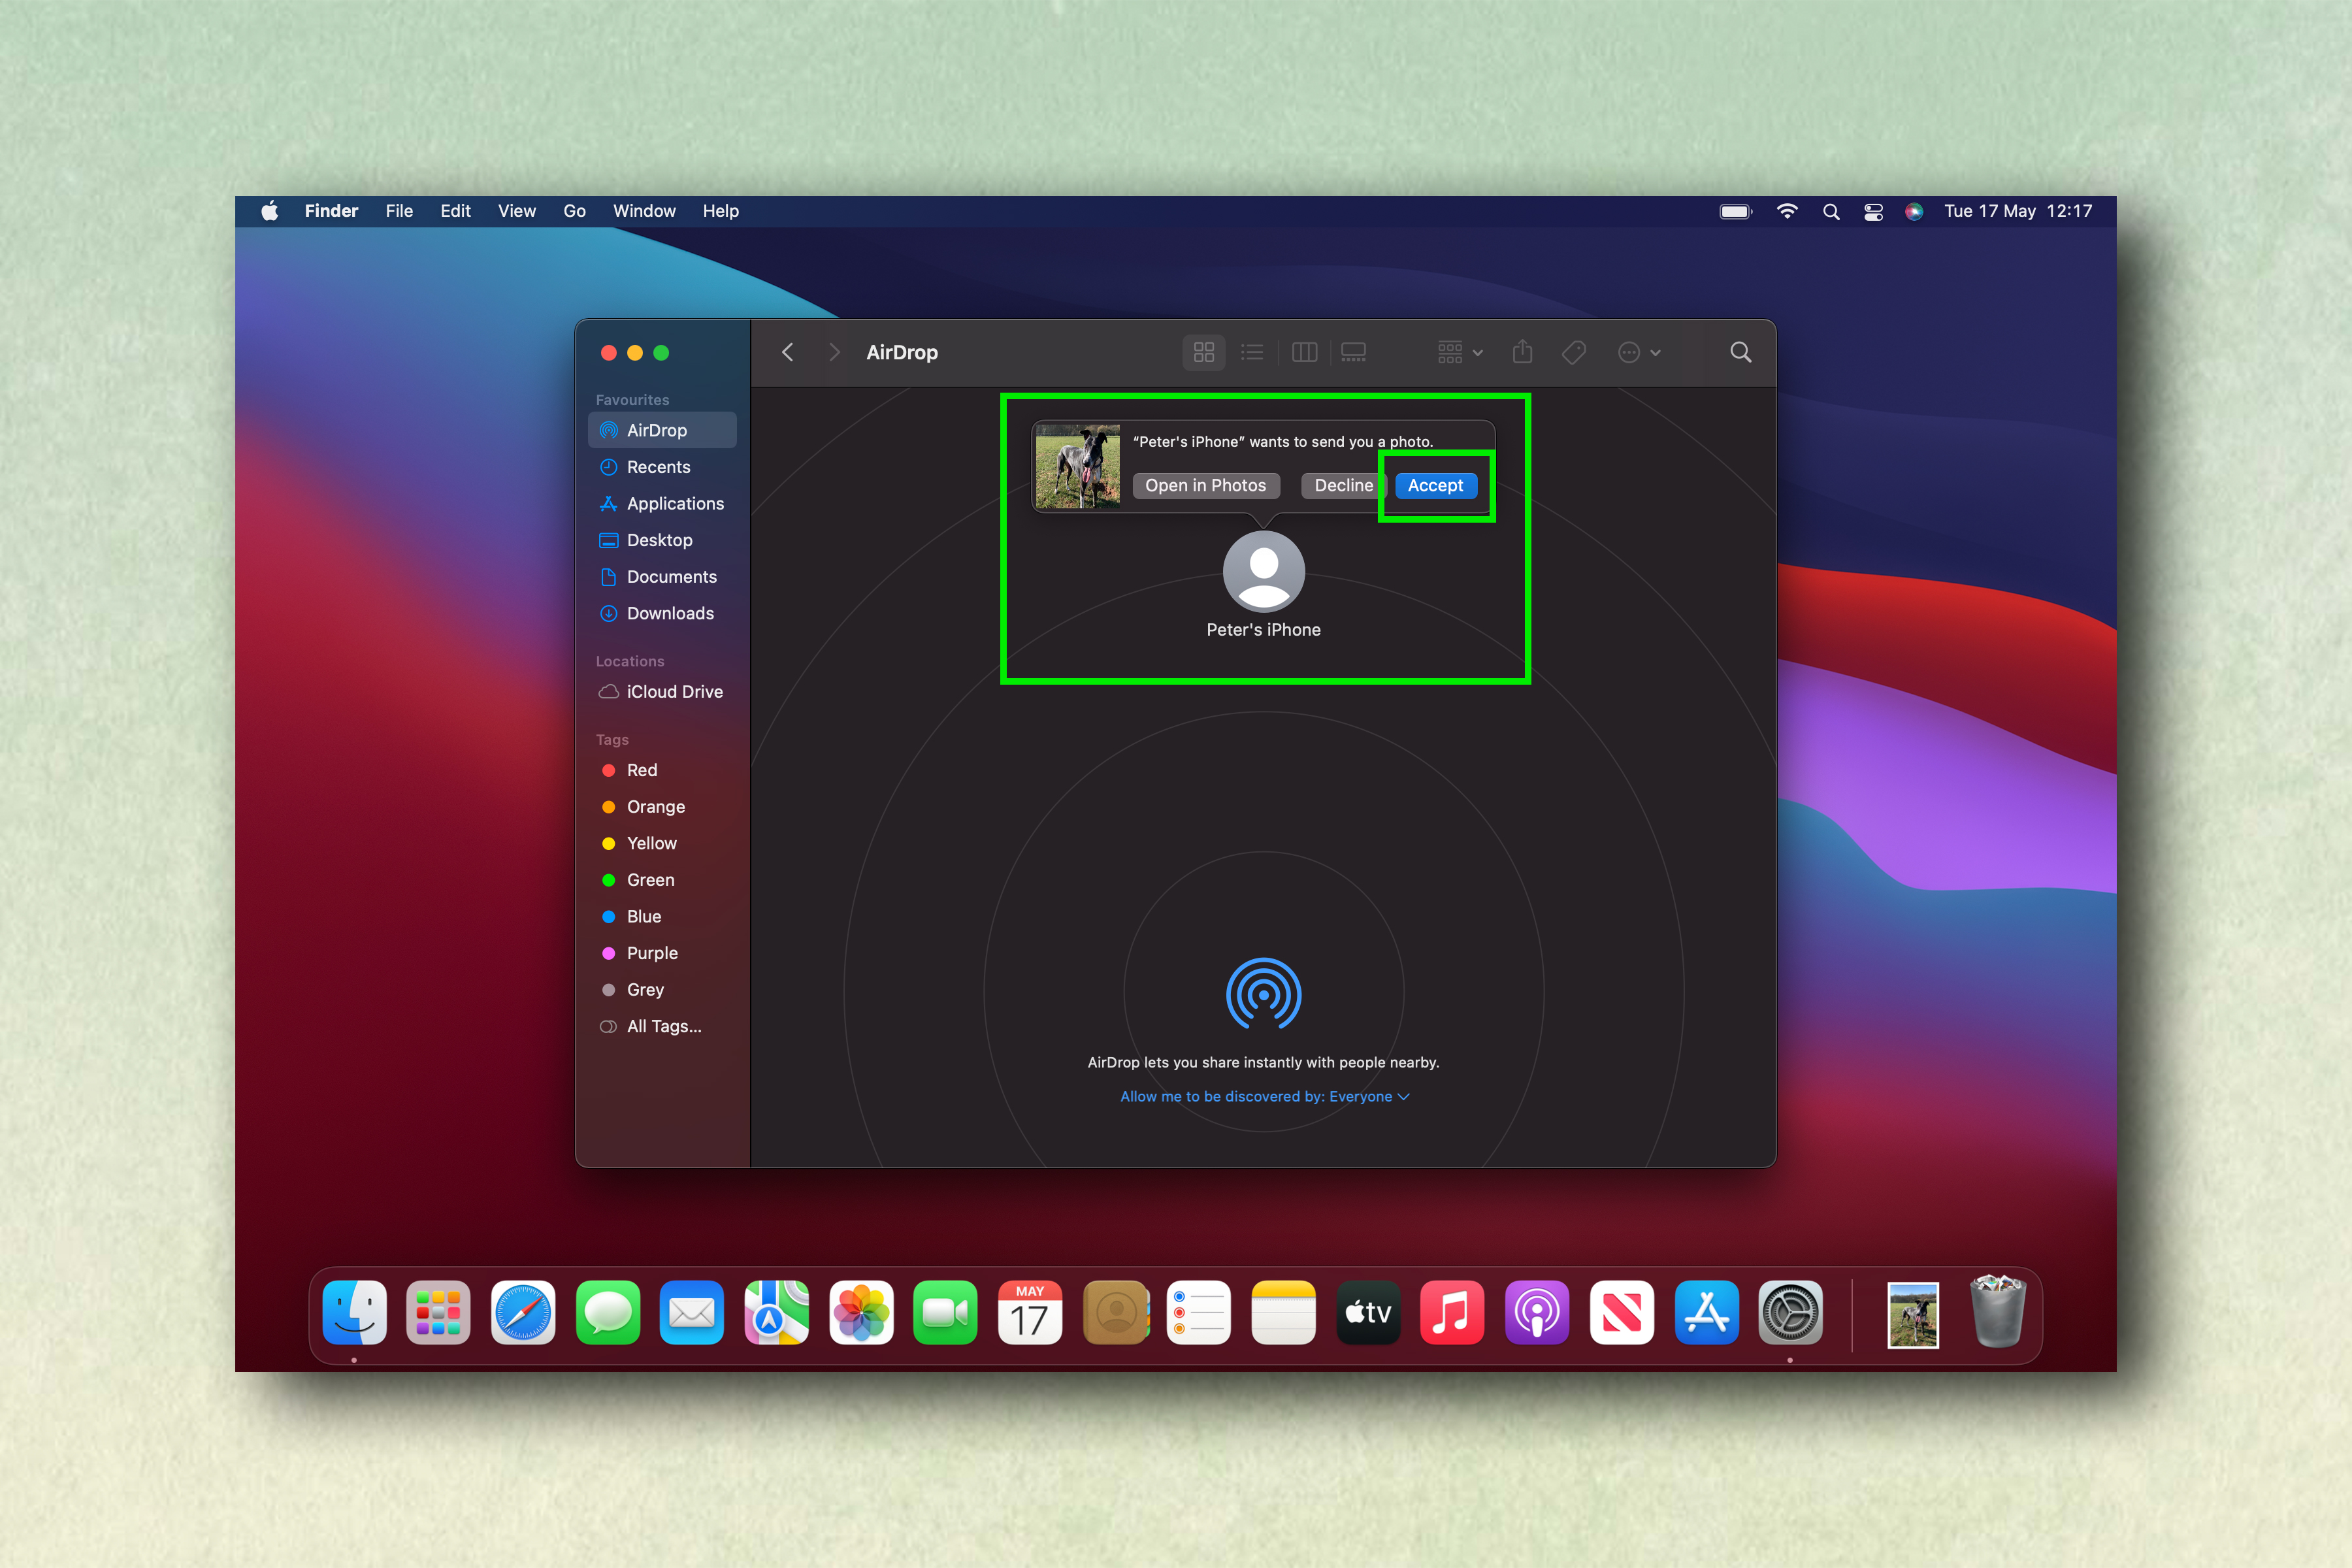 Screenshots of how to transfer photos from iPhone to Mac using AirDrop